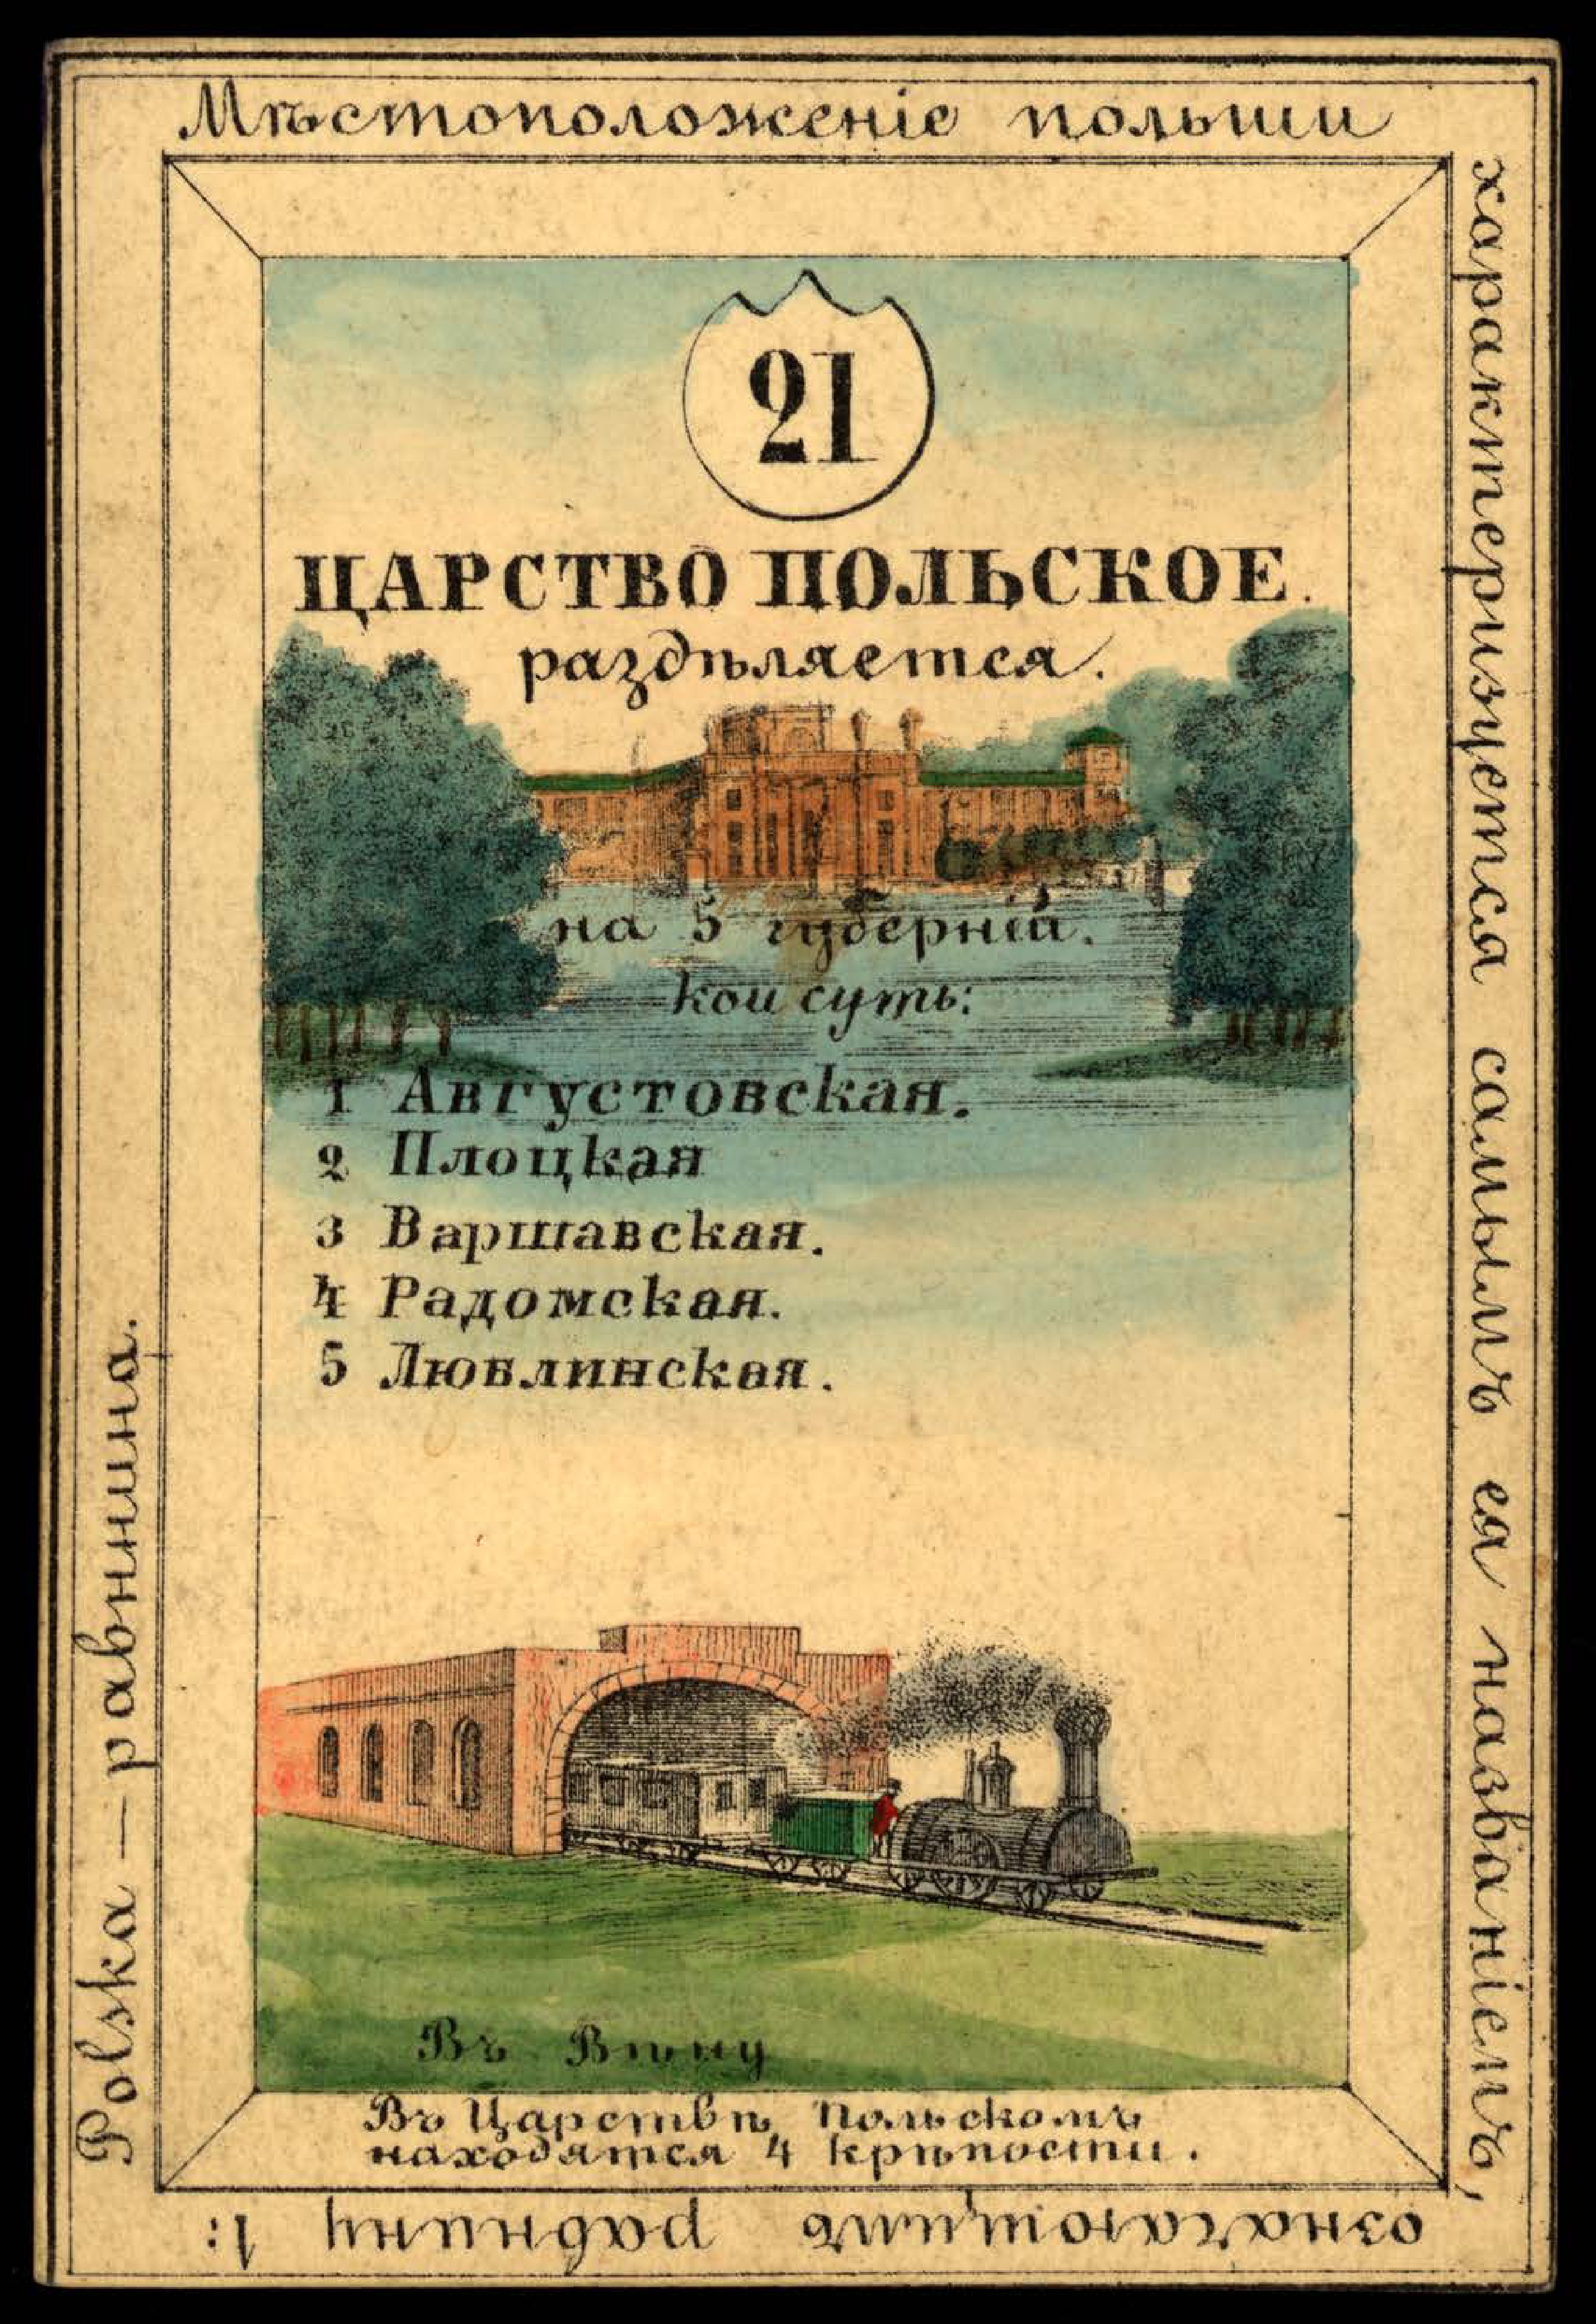 1856. Card from set of geographical cards of the Russian Empire 147